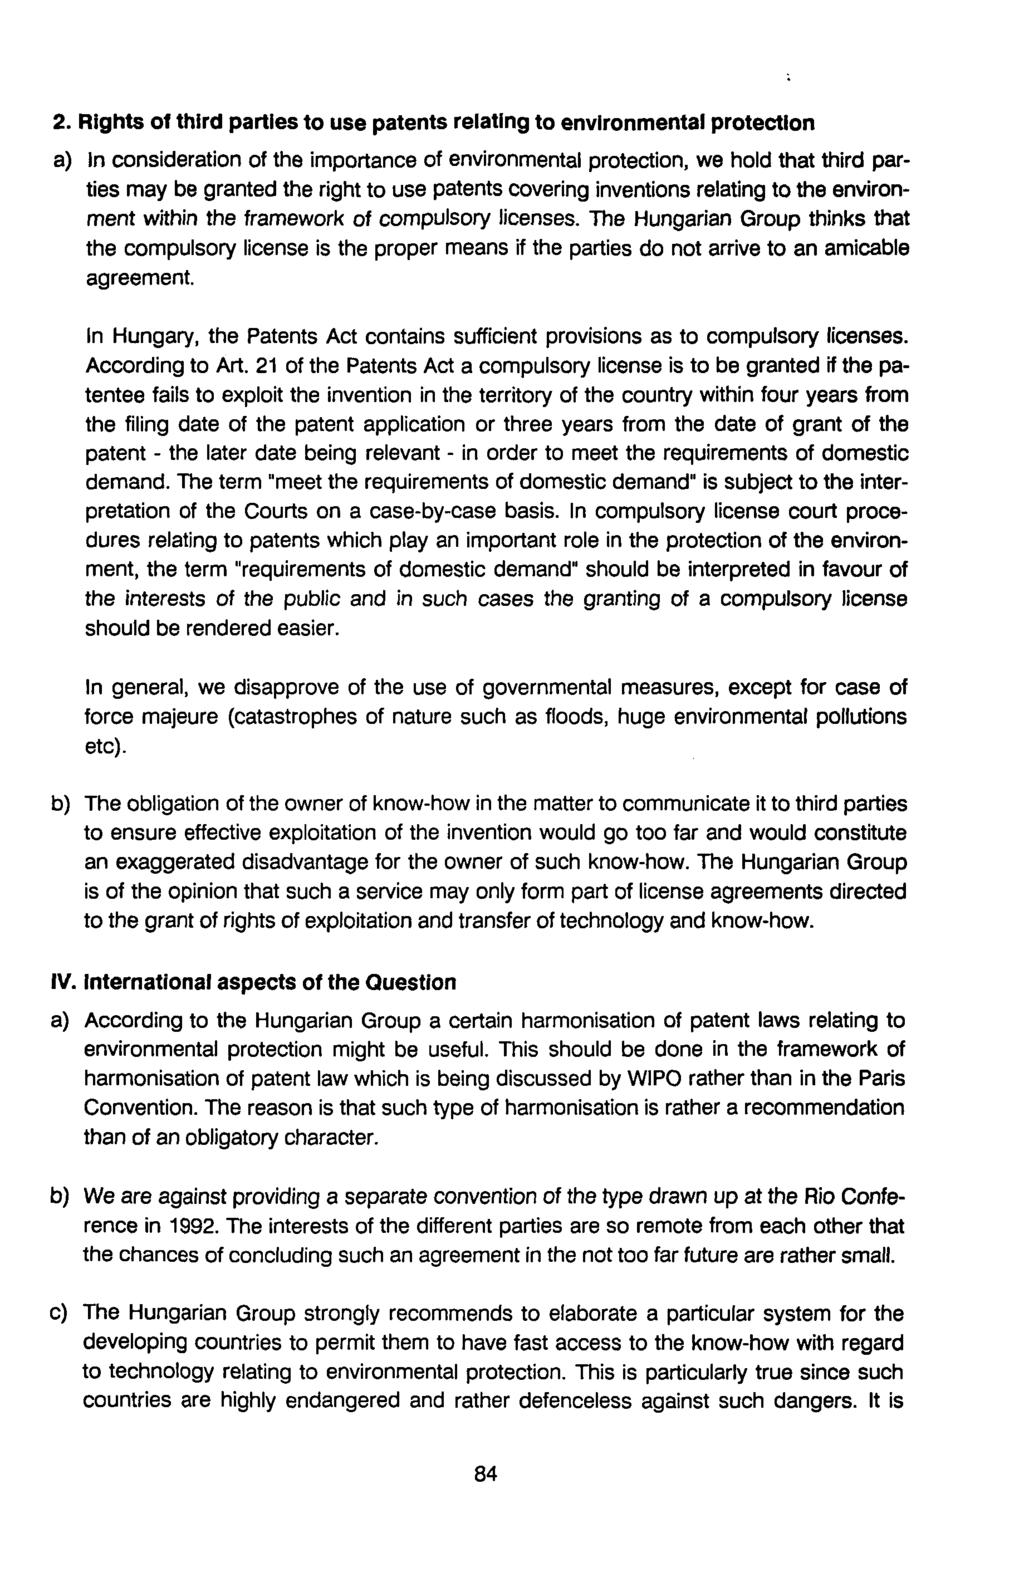 2. Rights of third parties to use patents relating to environmental protection In consideration of the importance of environmental protection, we hold that third parties may be granted the right to